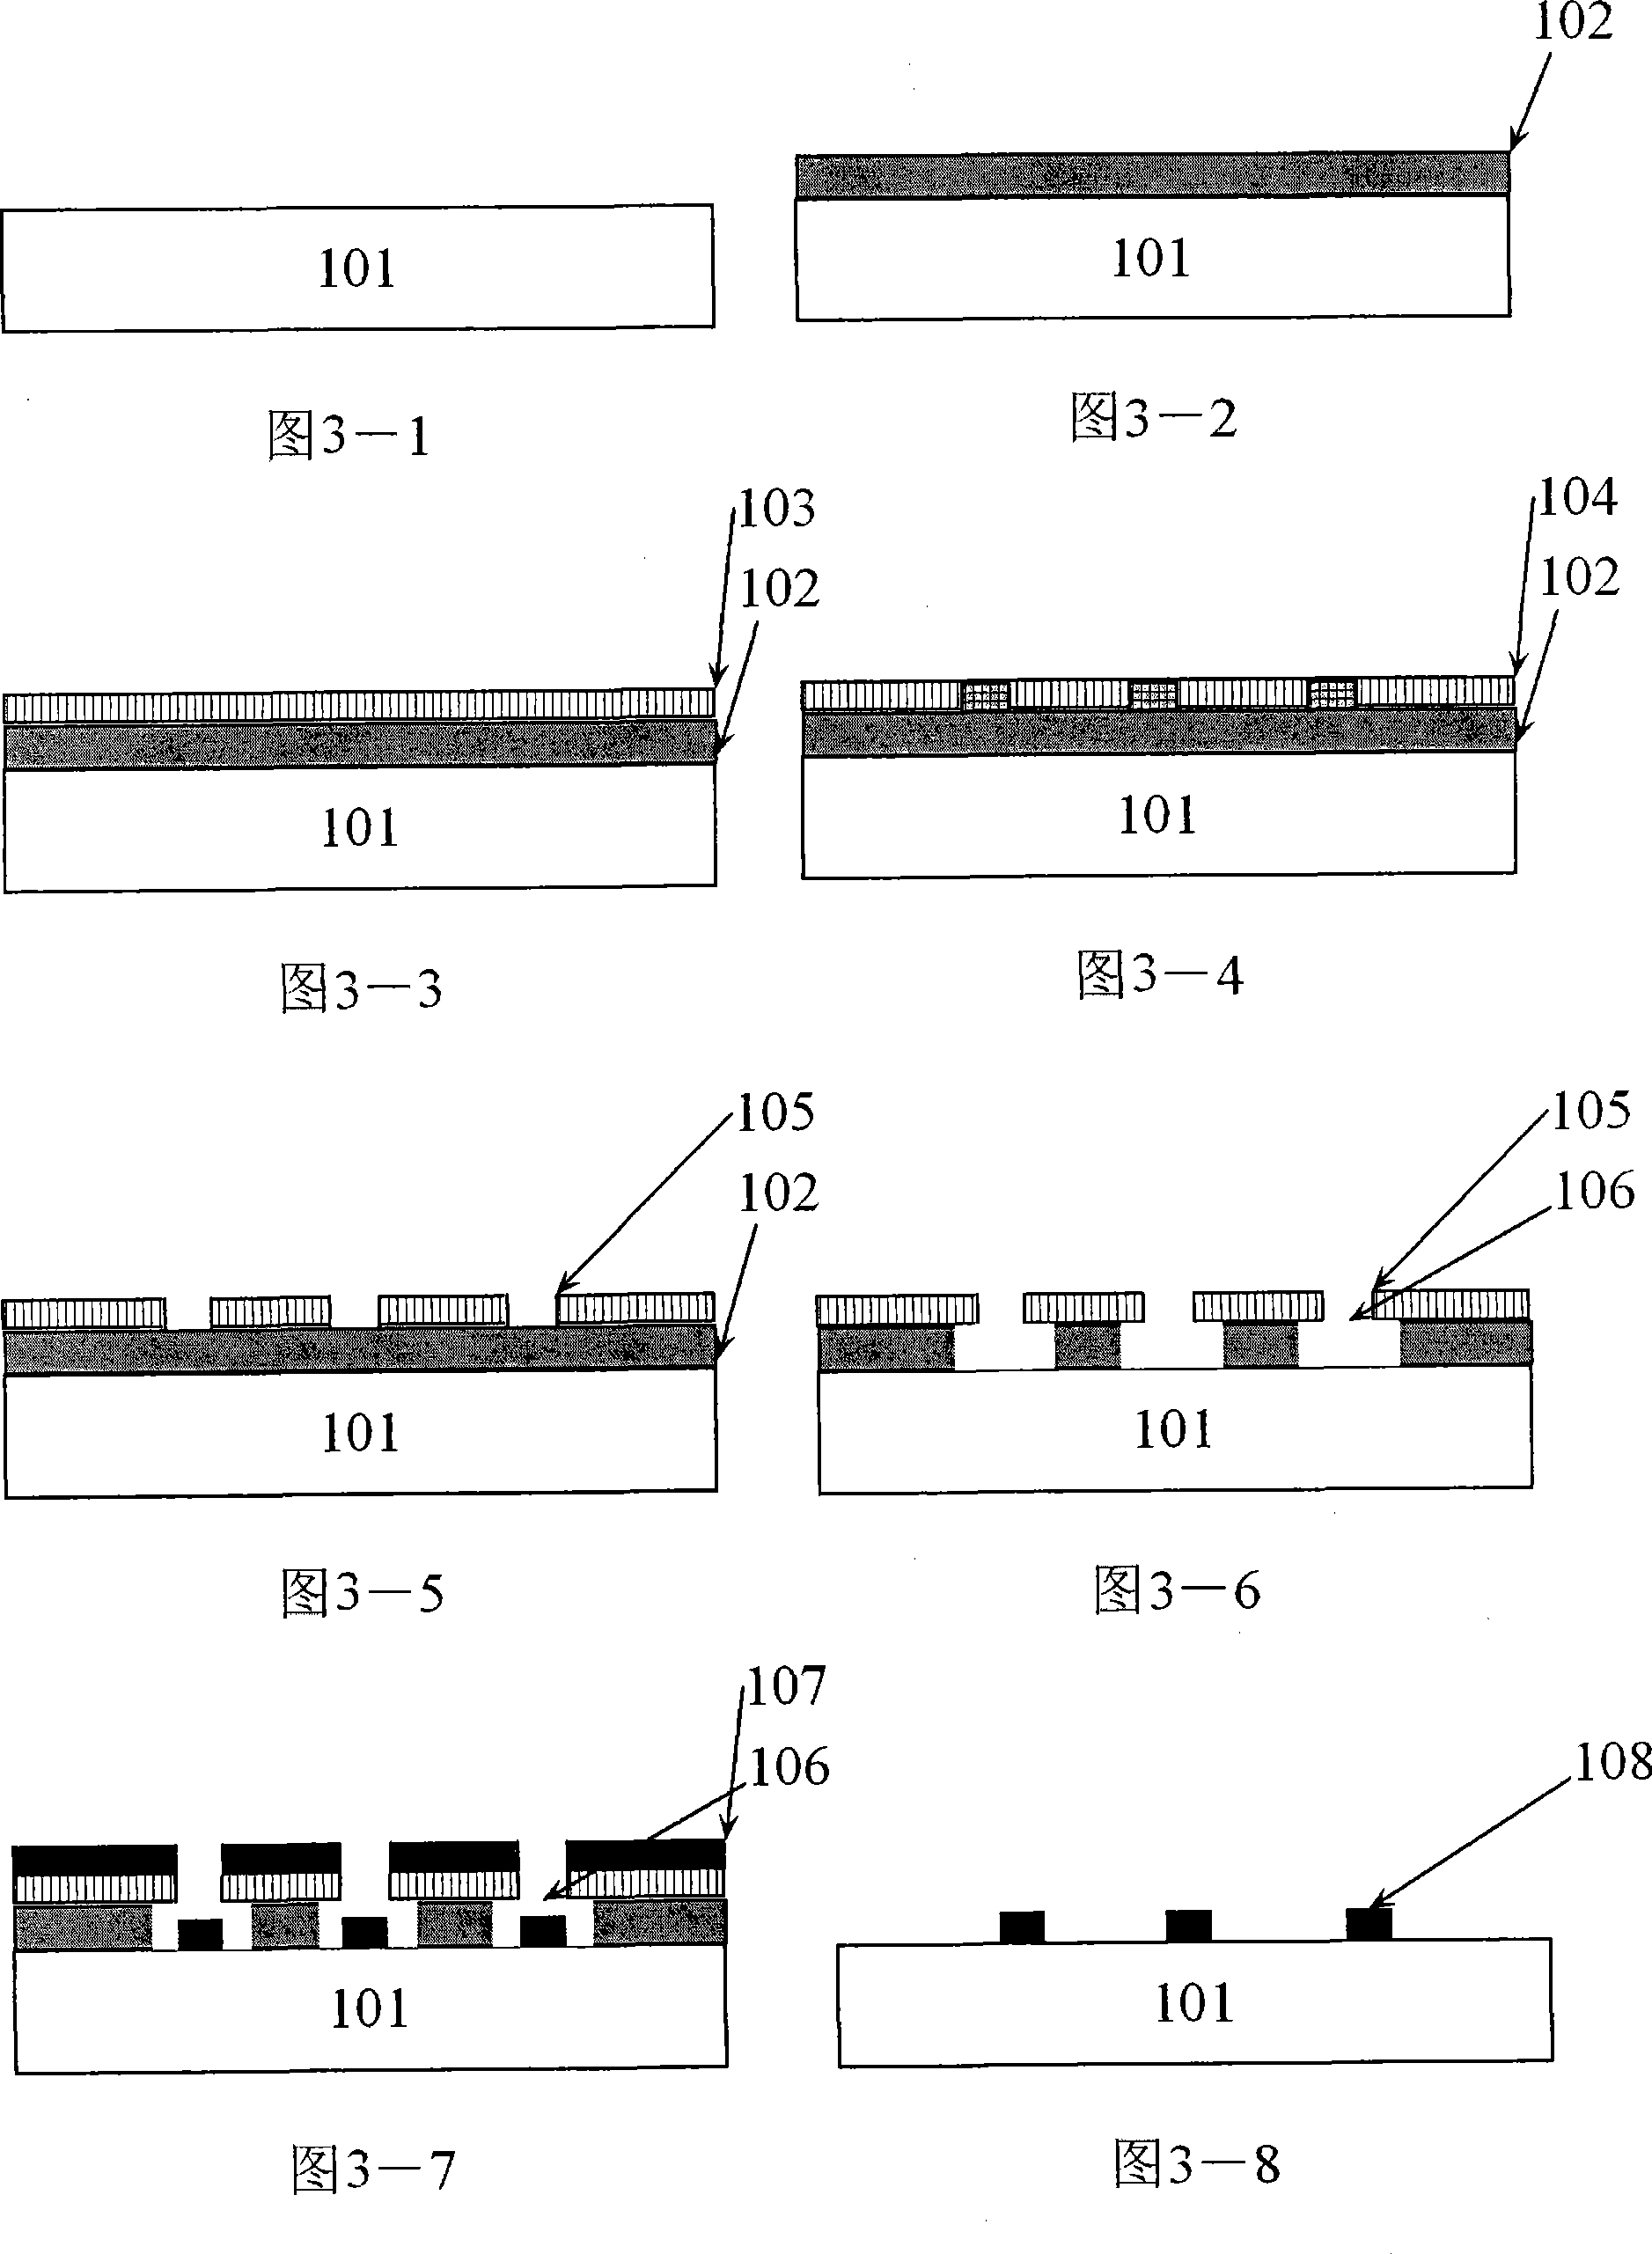 Double-layer glue removing method used for electron beam lithography stripping